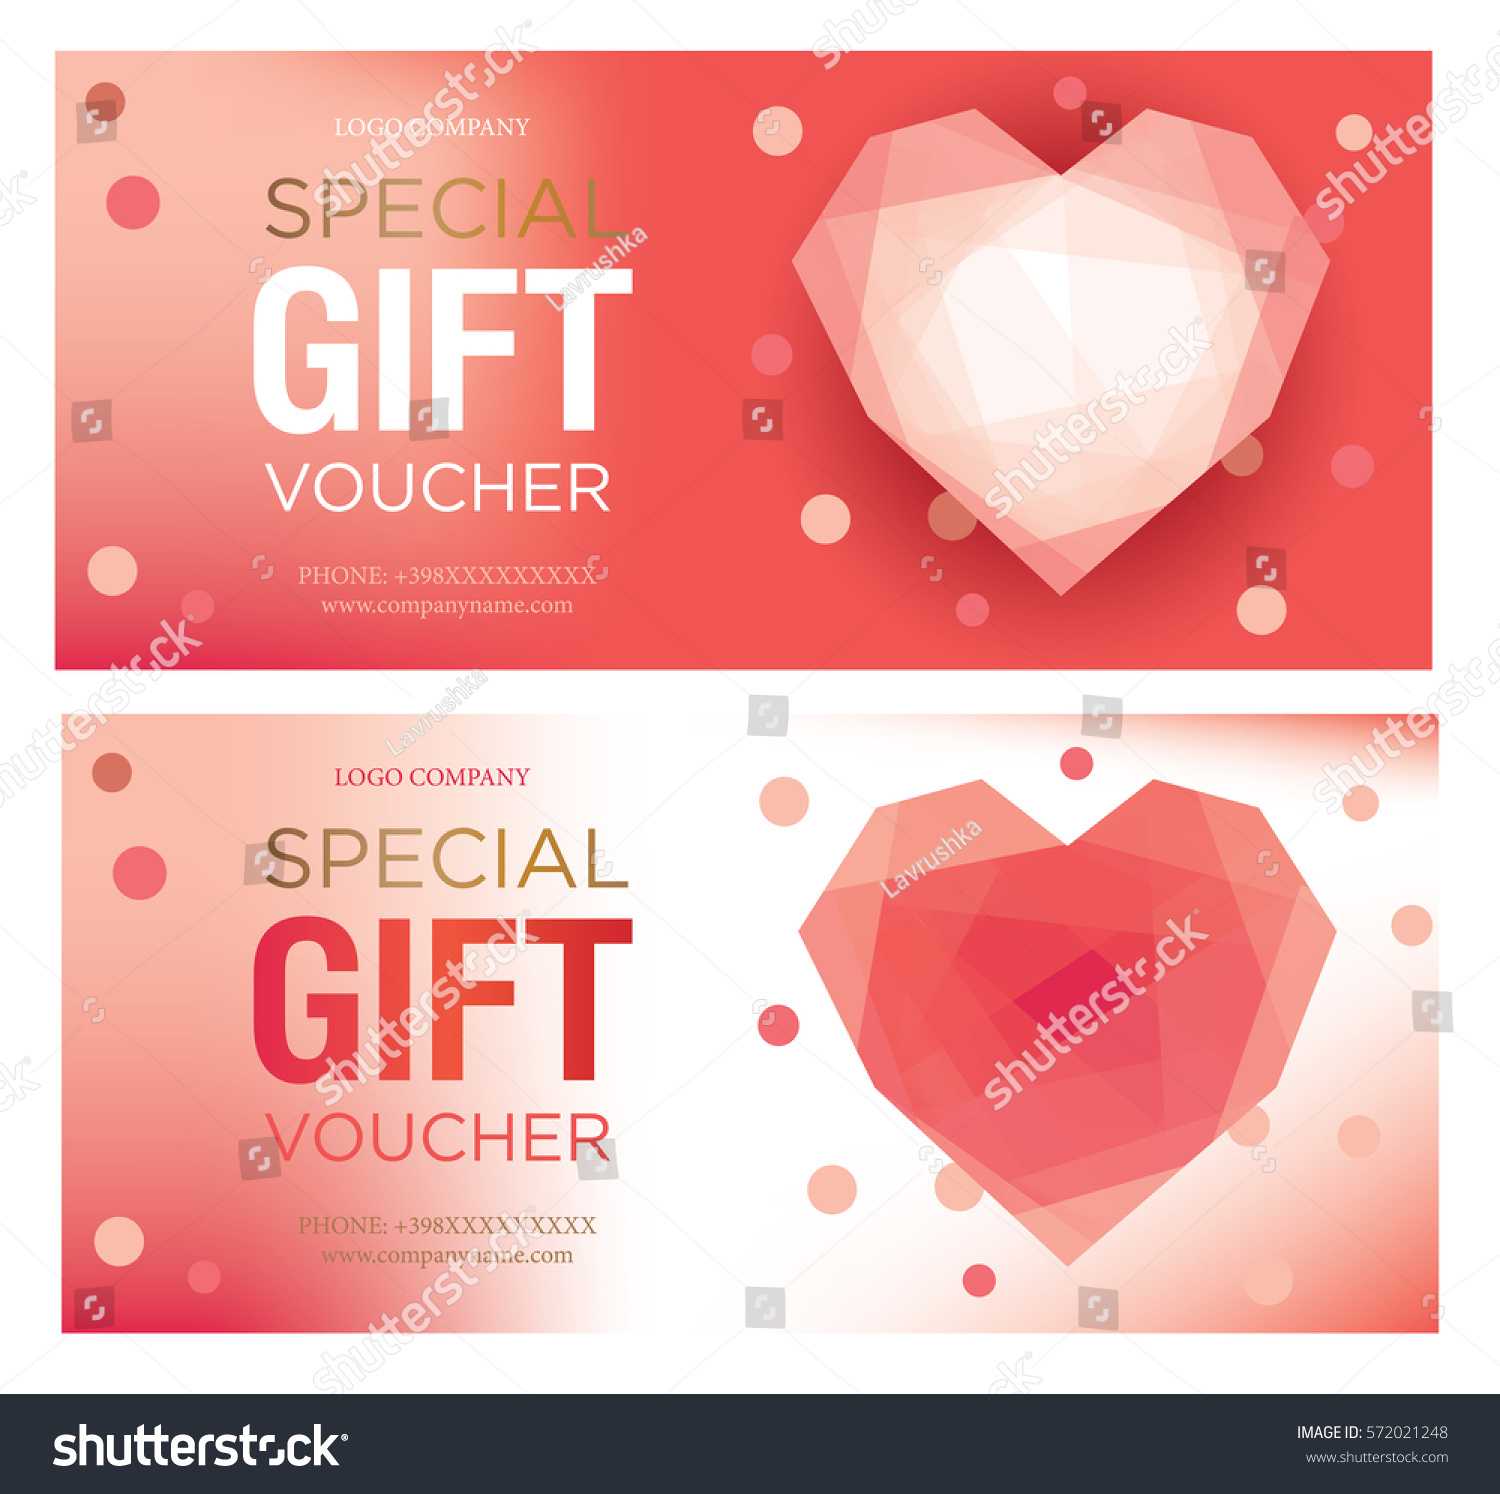 Gift Certificate Gift Card Gift Voucher Stock Vector For Spa Day Gift Certificate Template